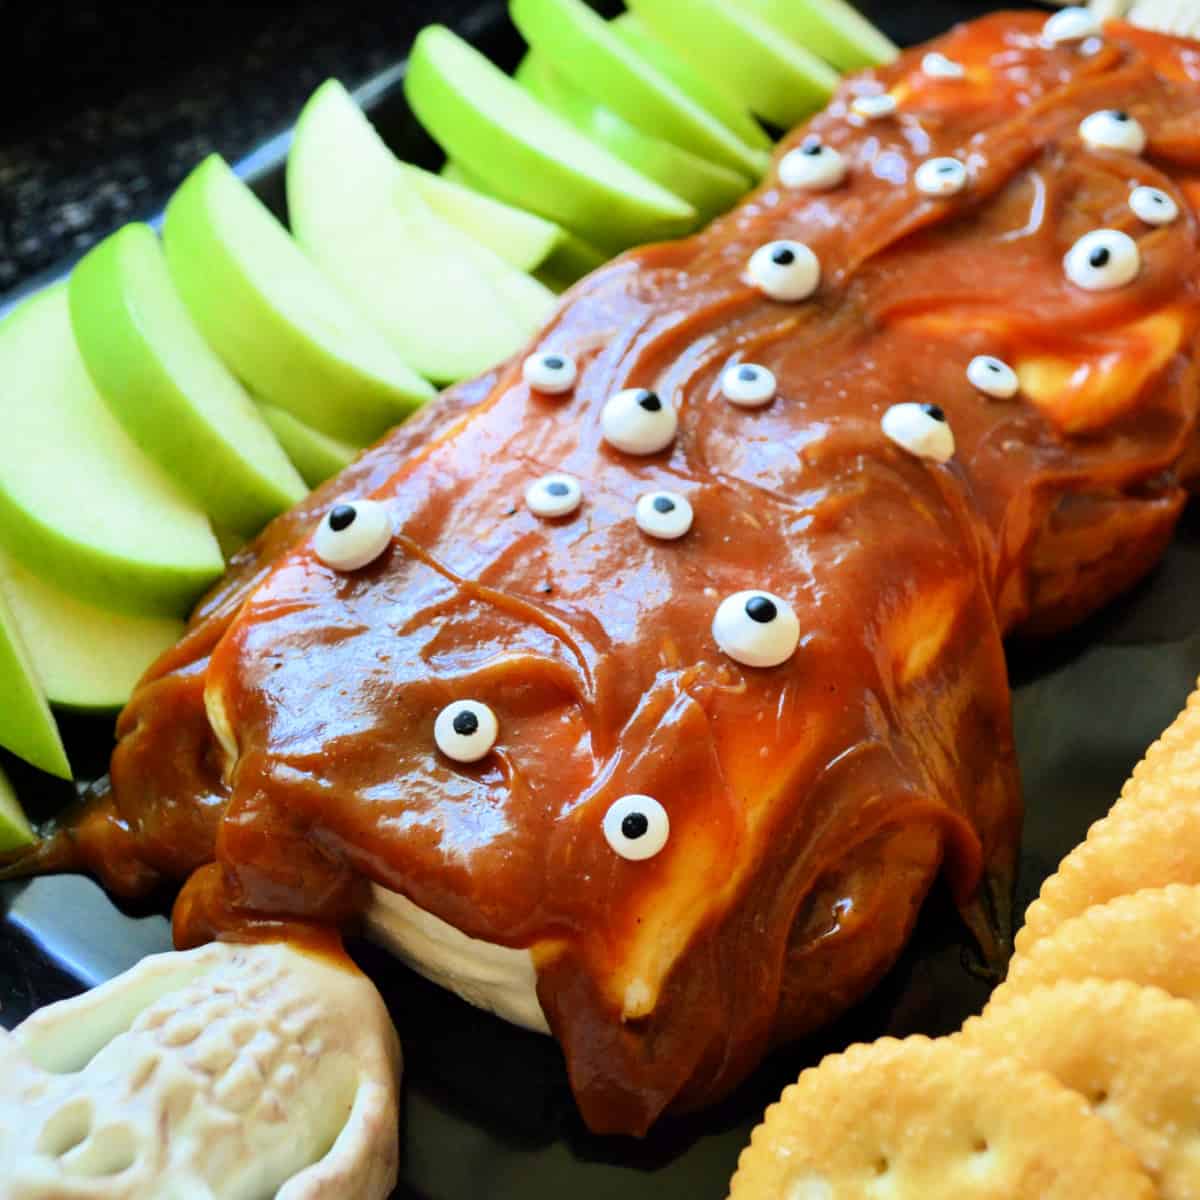 Cream cheese with carmel on top and eyeballs with apples and crackers on a tray.